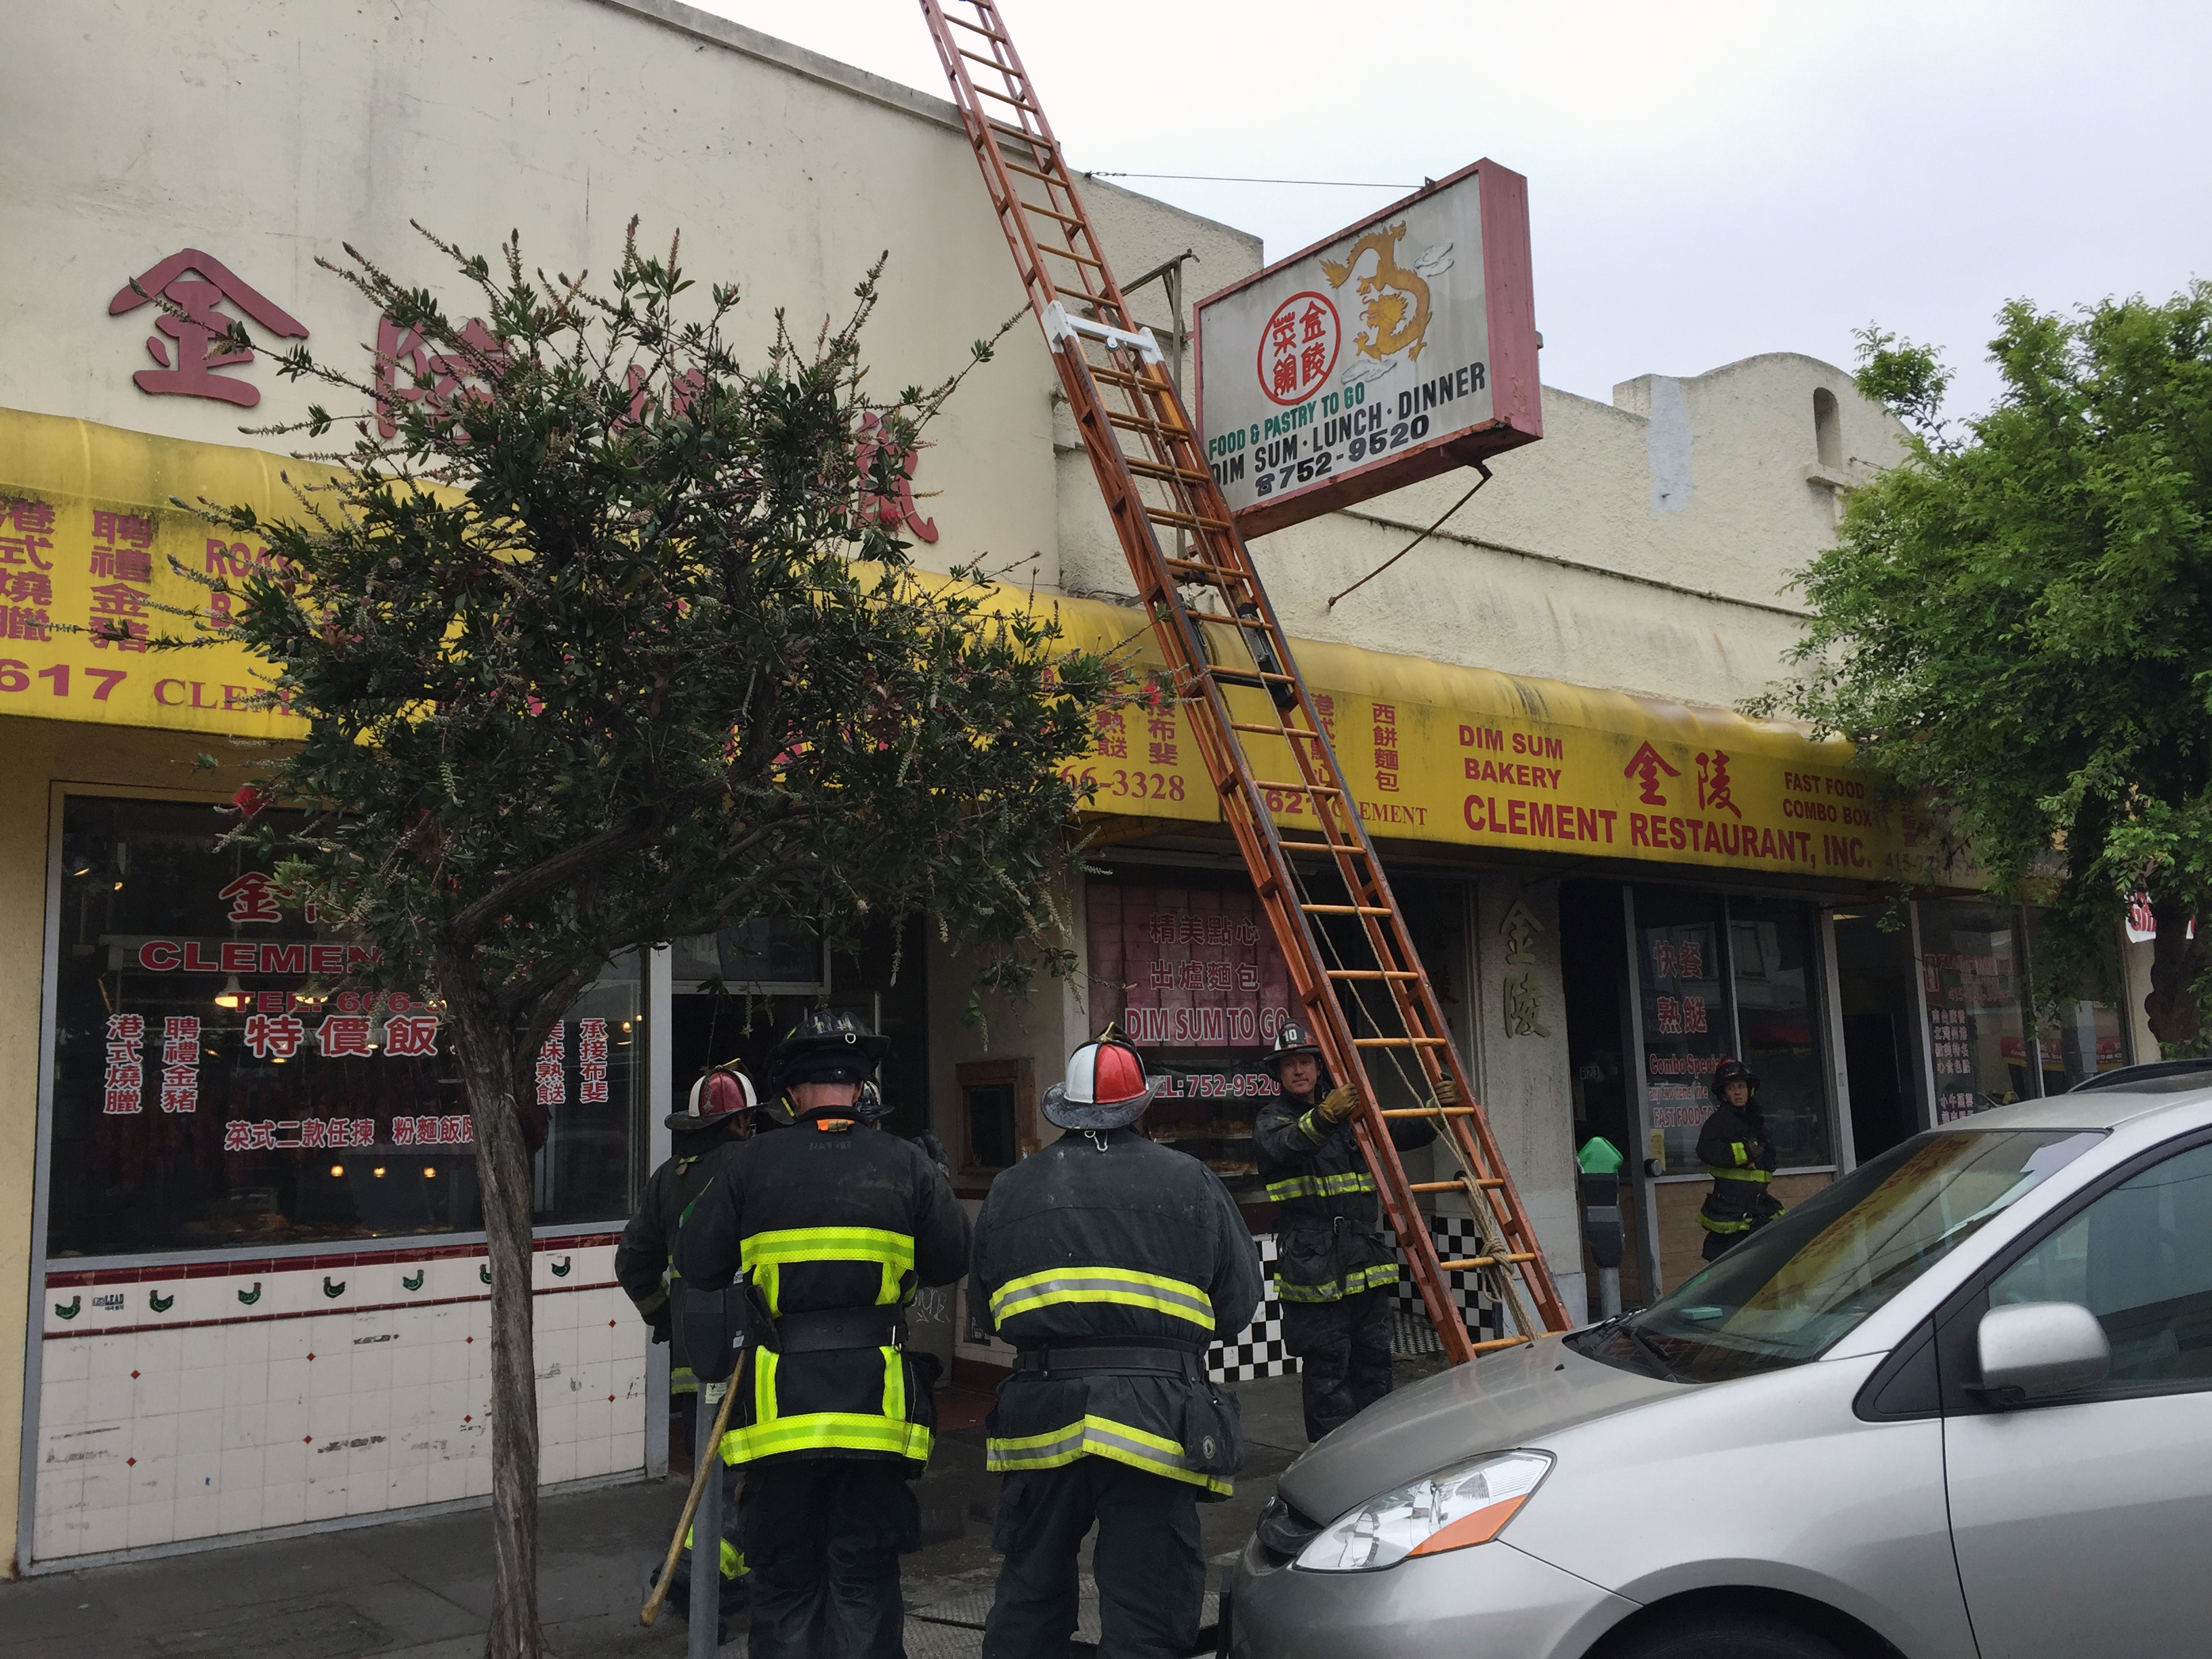 The fire broke out at a restaurant at 623 Clement Street